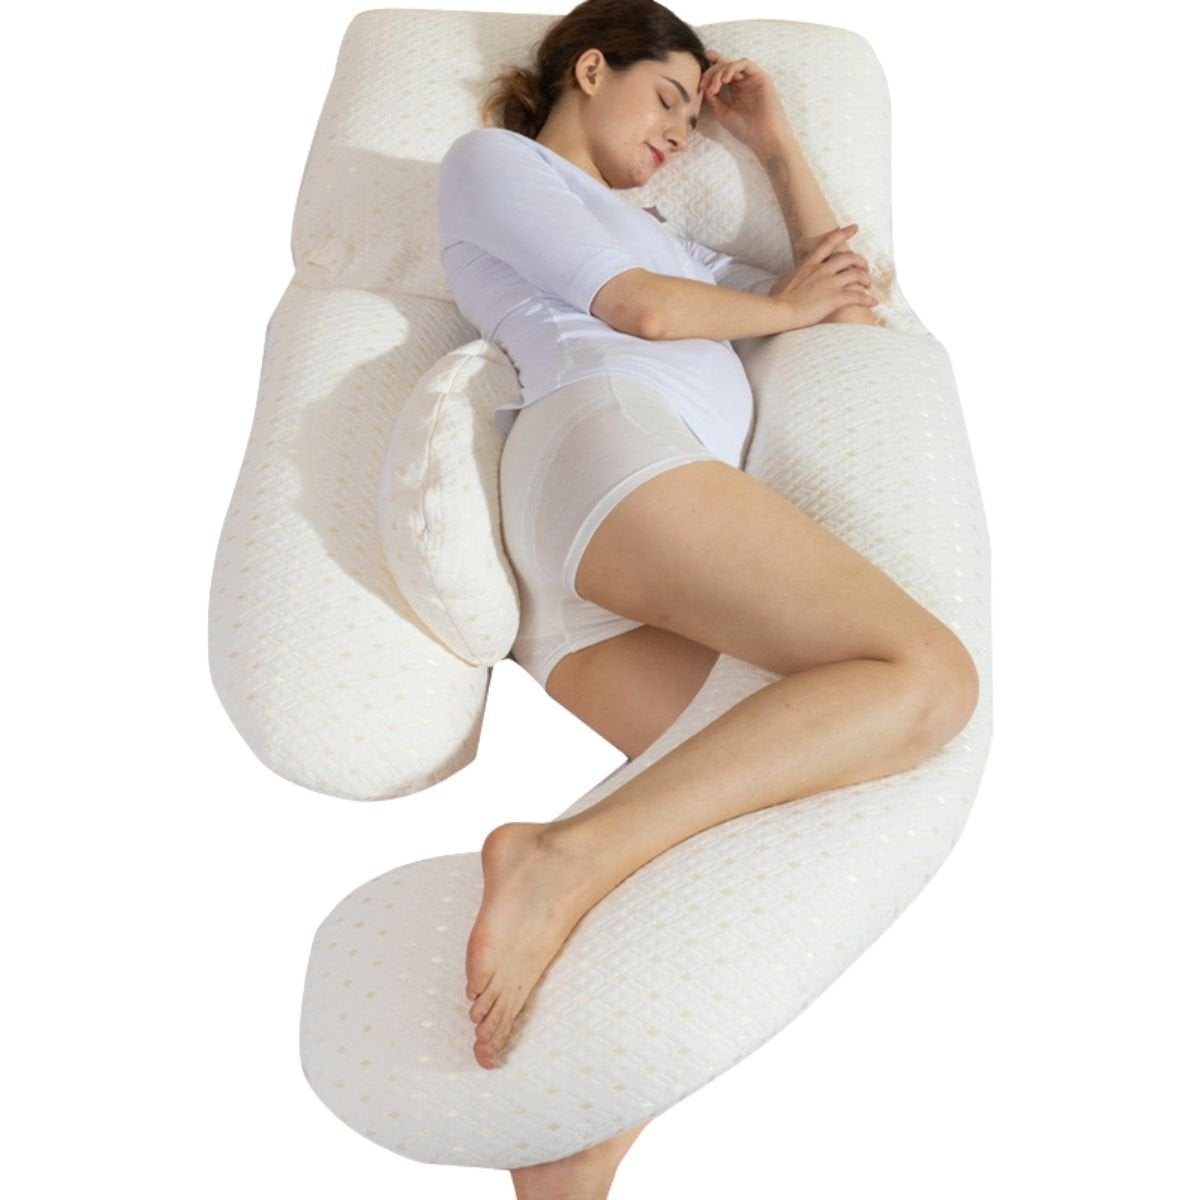 MaterniCare SnuggleMate Pregnancy, Maternity & Nursing Support Pillow